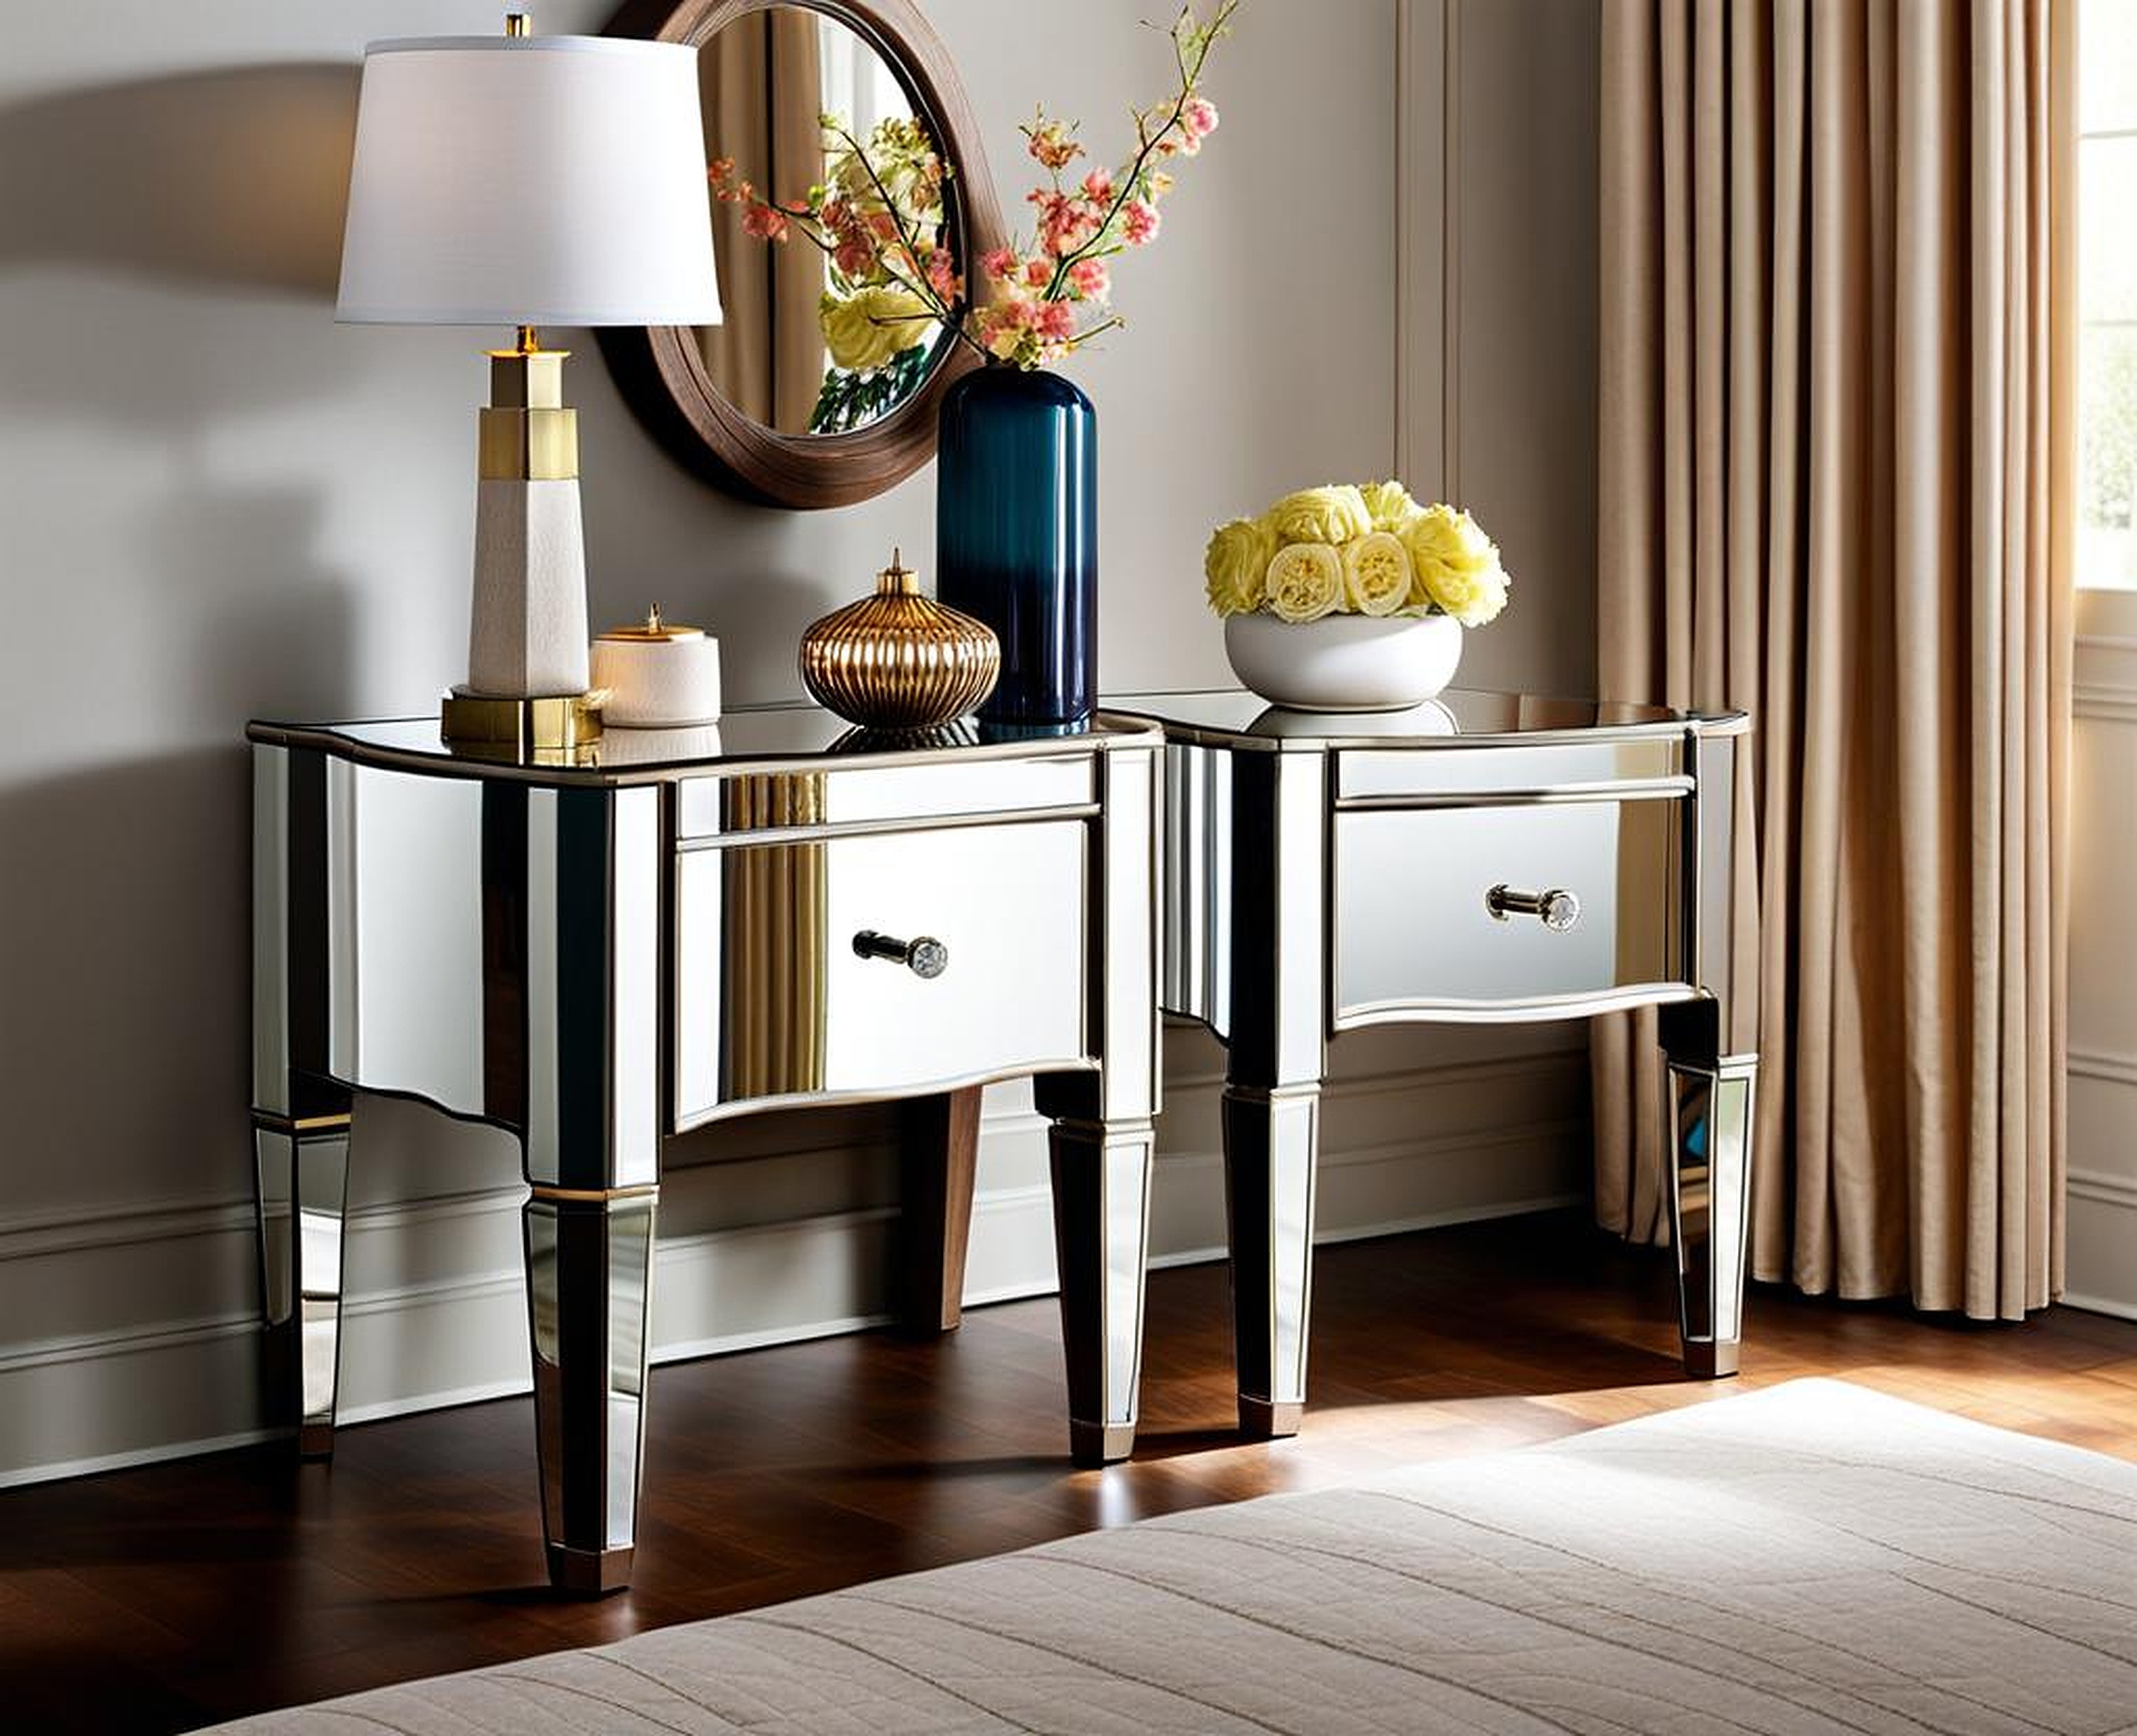 Mirrored Bedroom Side Tables for Elegant Interiors